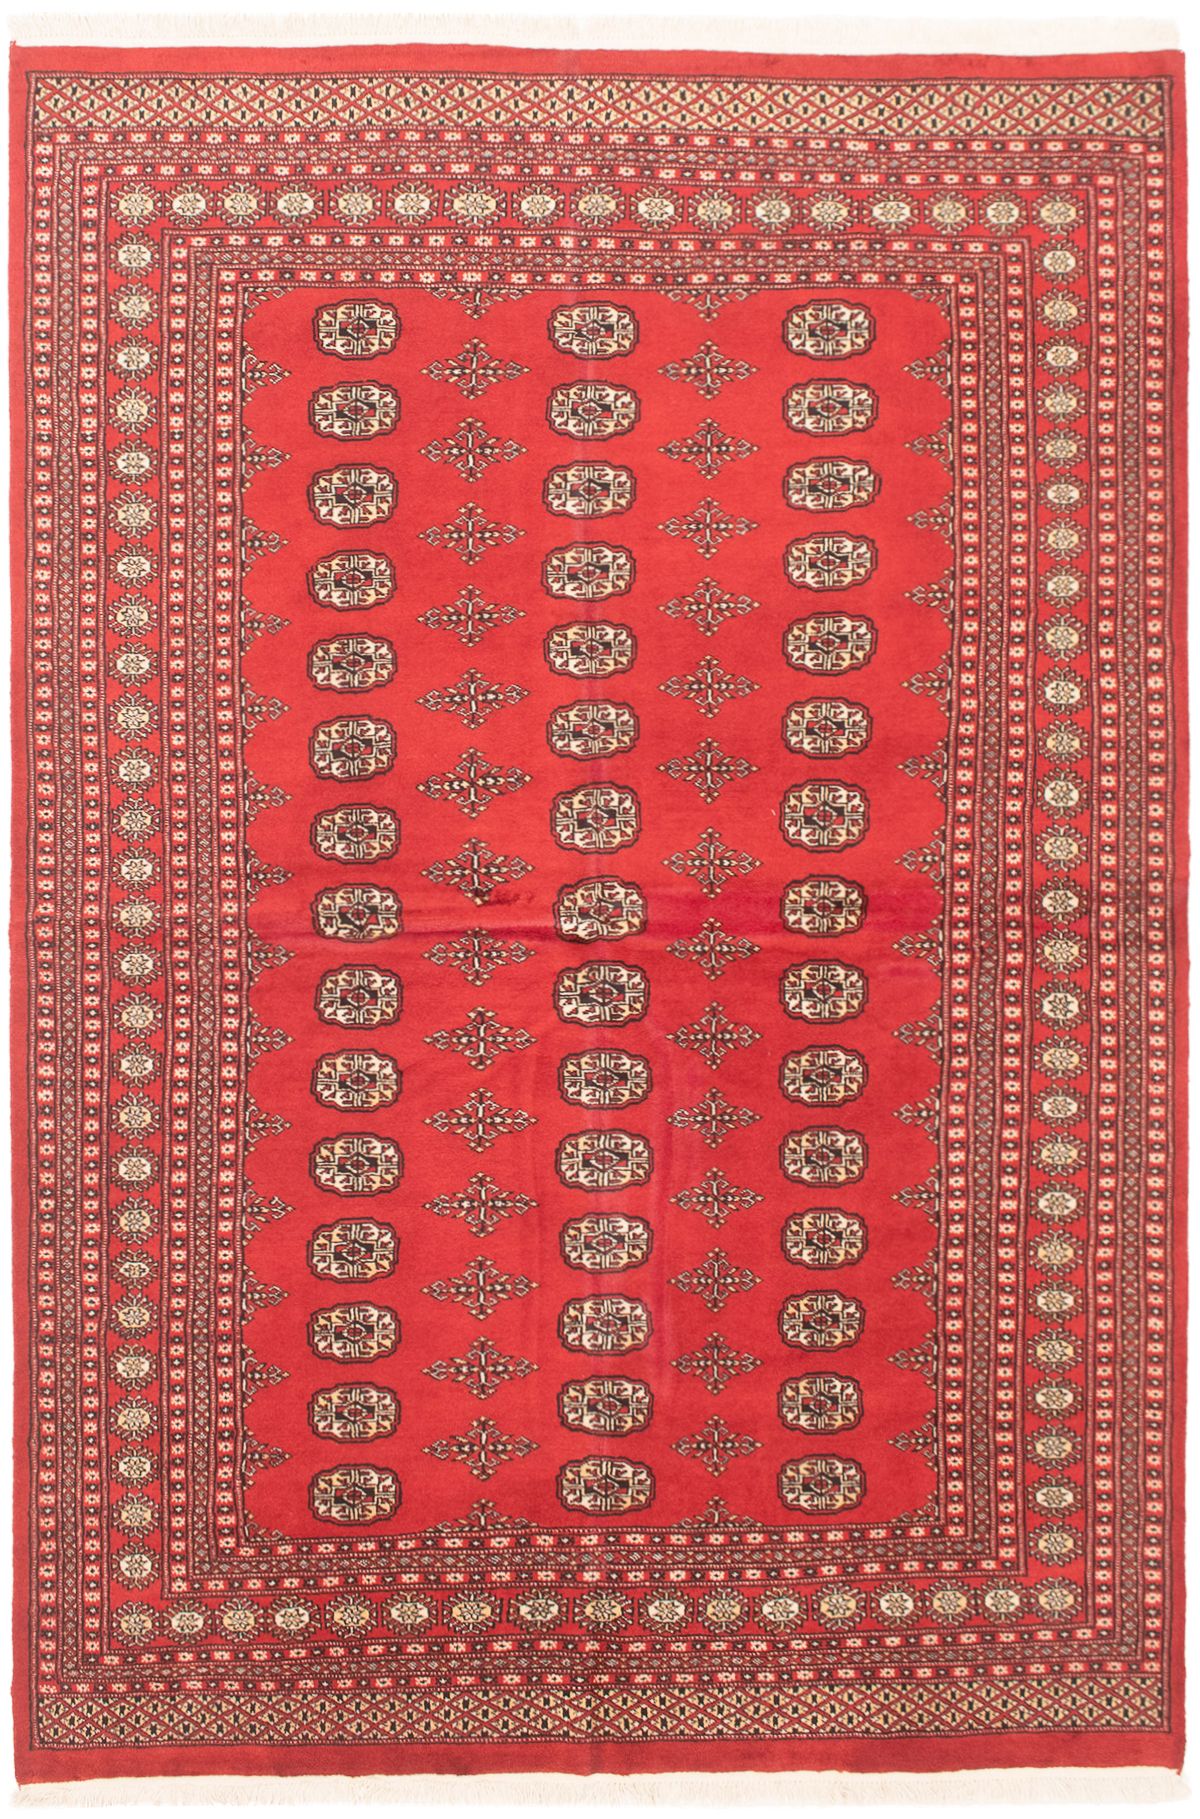 Hand-knotted Finest Peshawar Bokhara Red Wool Rug 6'0" x 8'10"  Size: 6'0" x 8'10"  